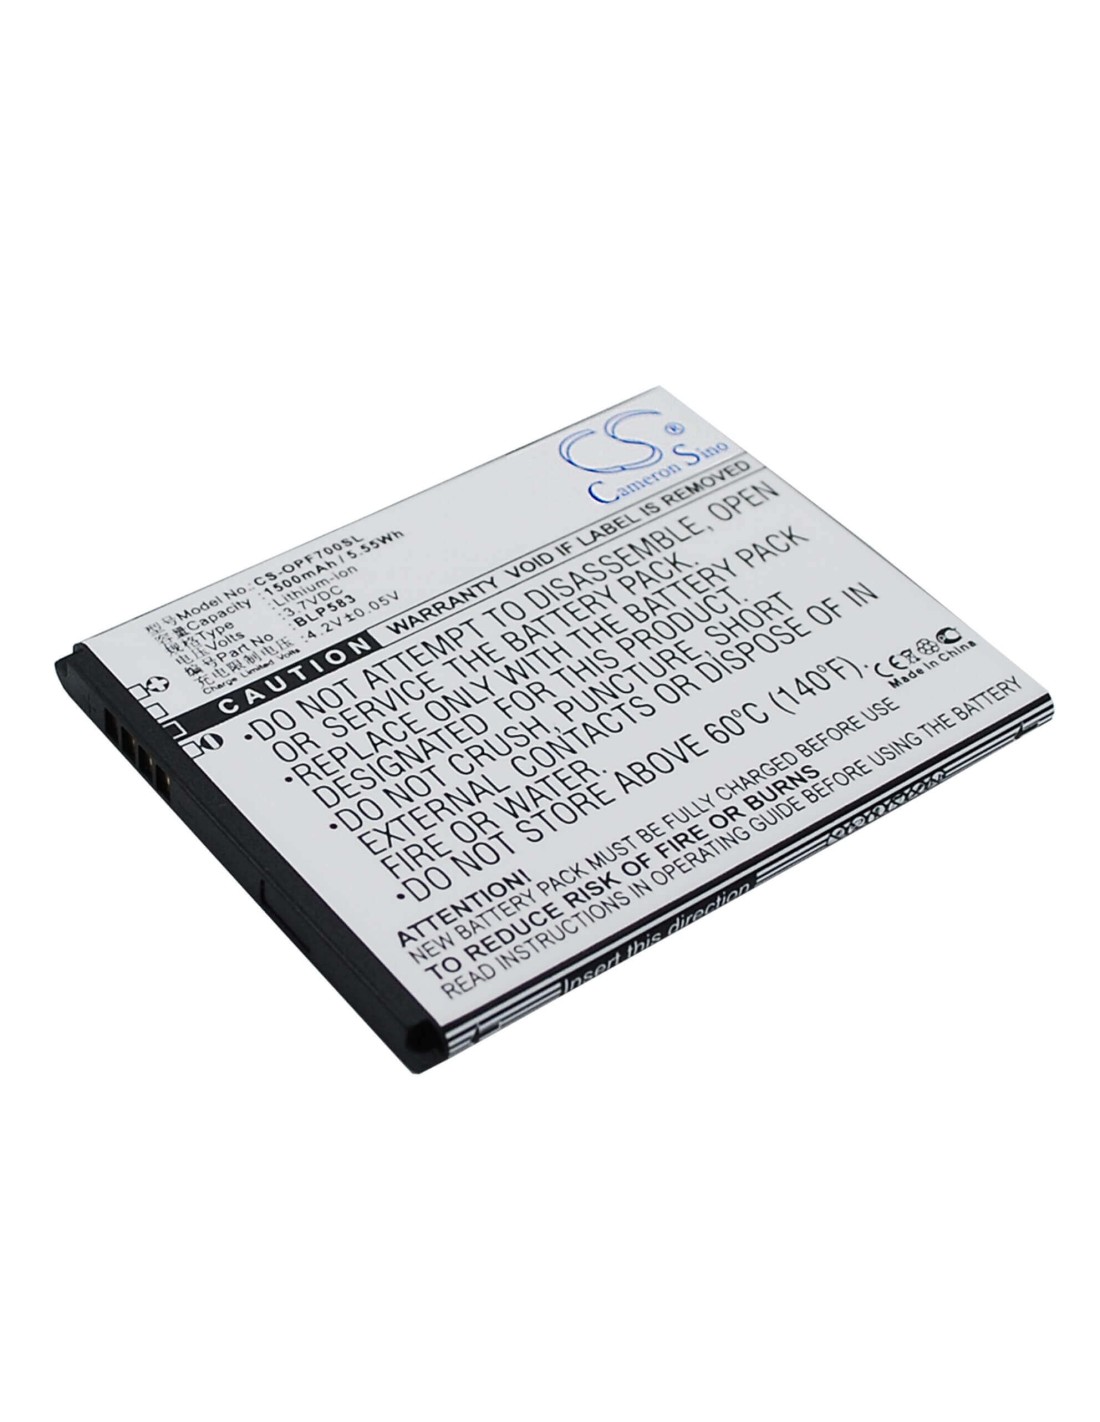 Battery for OPPO 1105, 1107, Find 7 Dual SIM 3.7V, 1500mAh - 5.55Wh